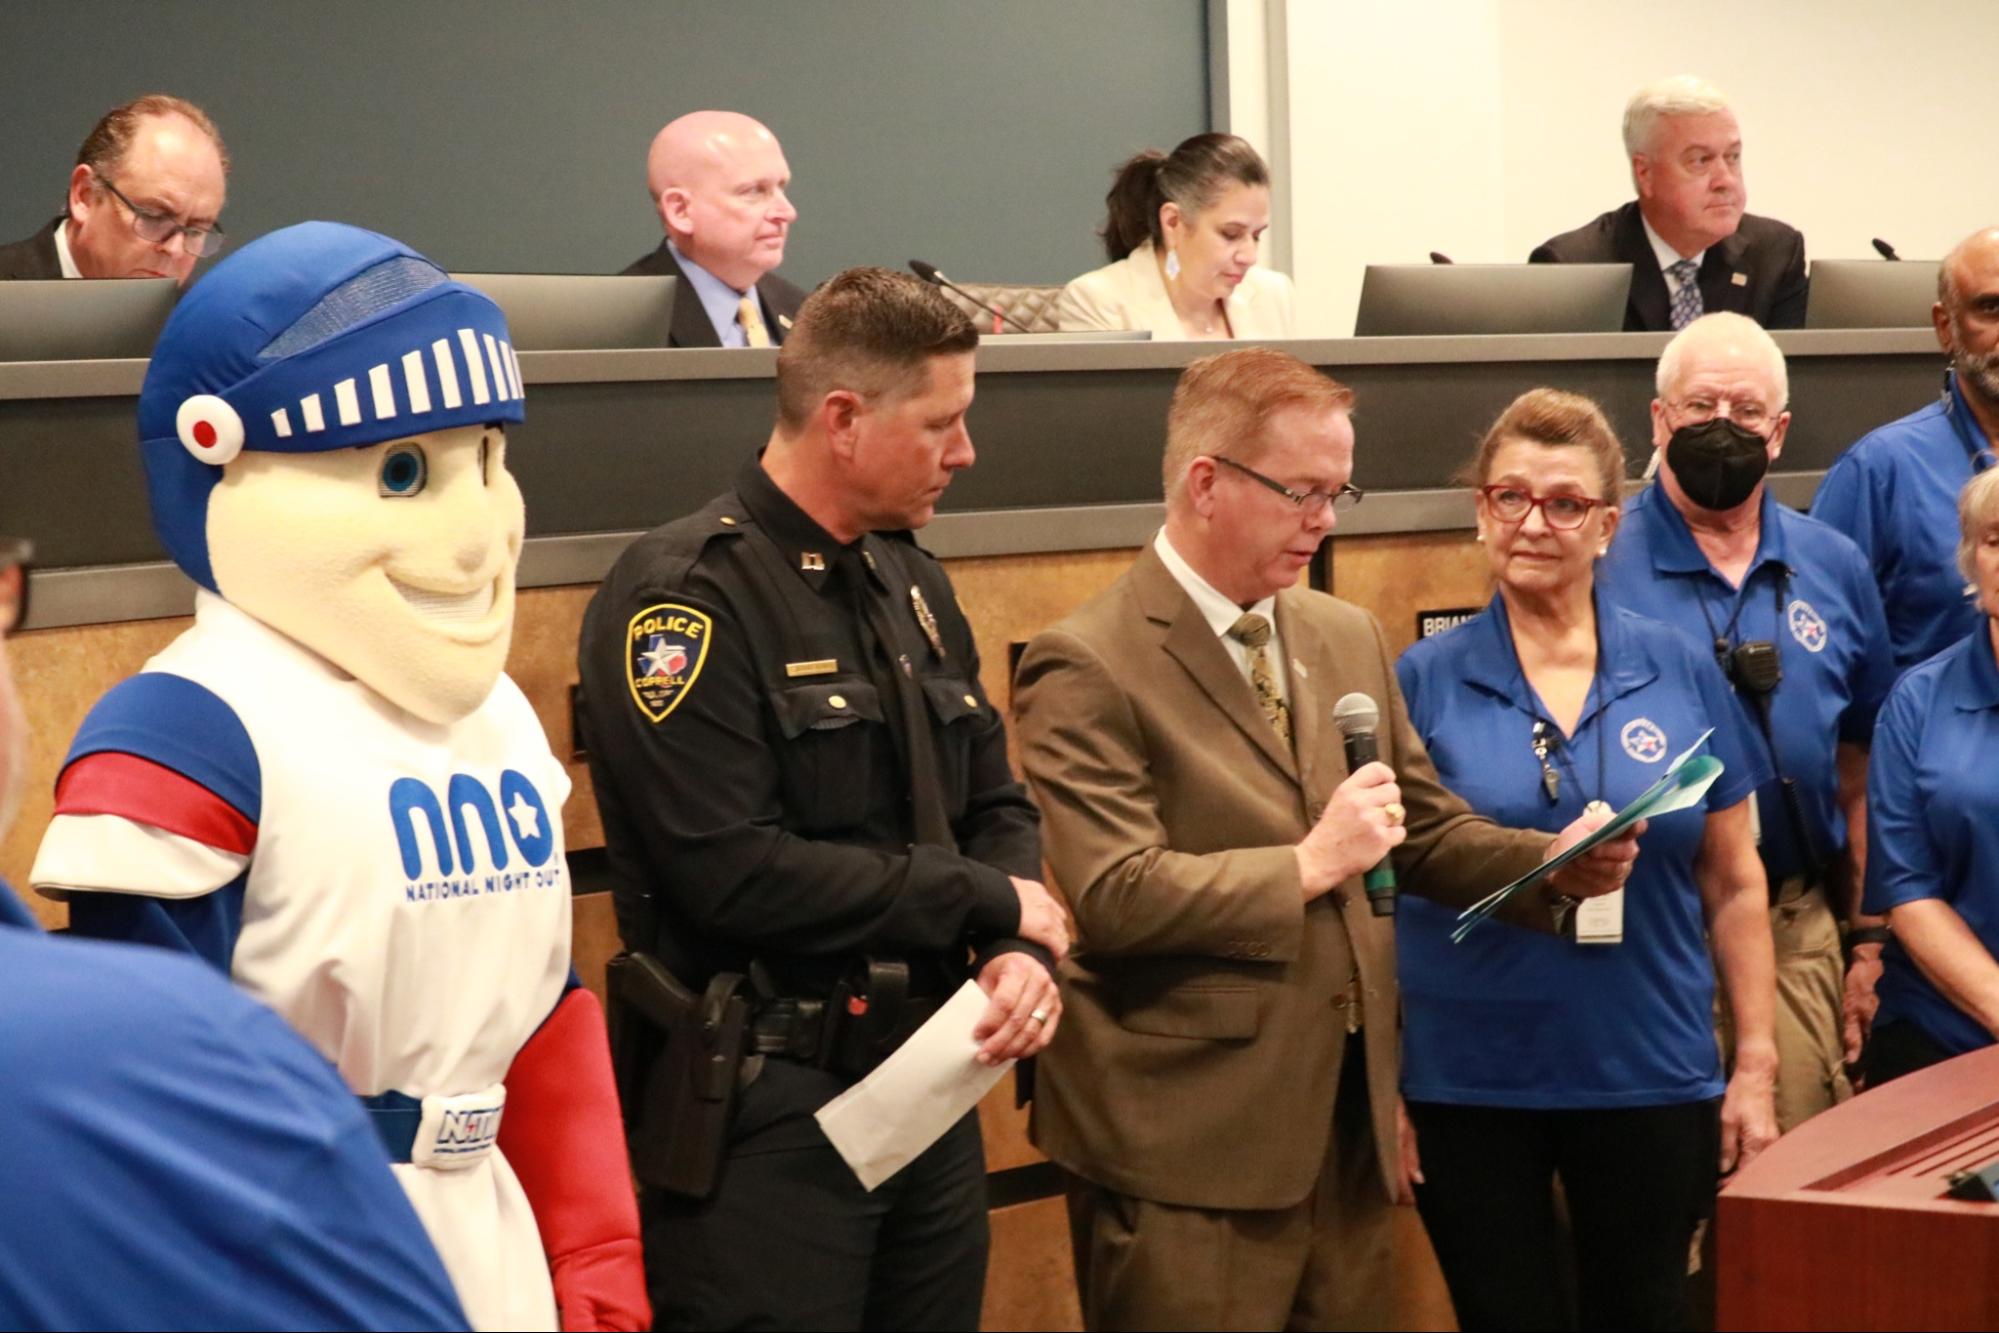 Coppell Mayor Wes Mays proclaims Oct. 3, 2023 to be “National Night Out,” a day celebrating the Coppell police and community ties in crime prevention. The Coppell City Council held its regular session on Tuesday in the council chambers at Town Center.